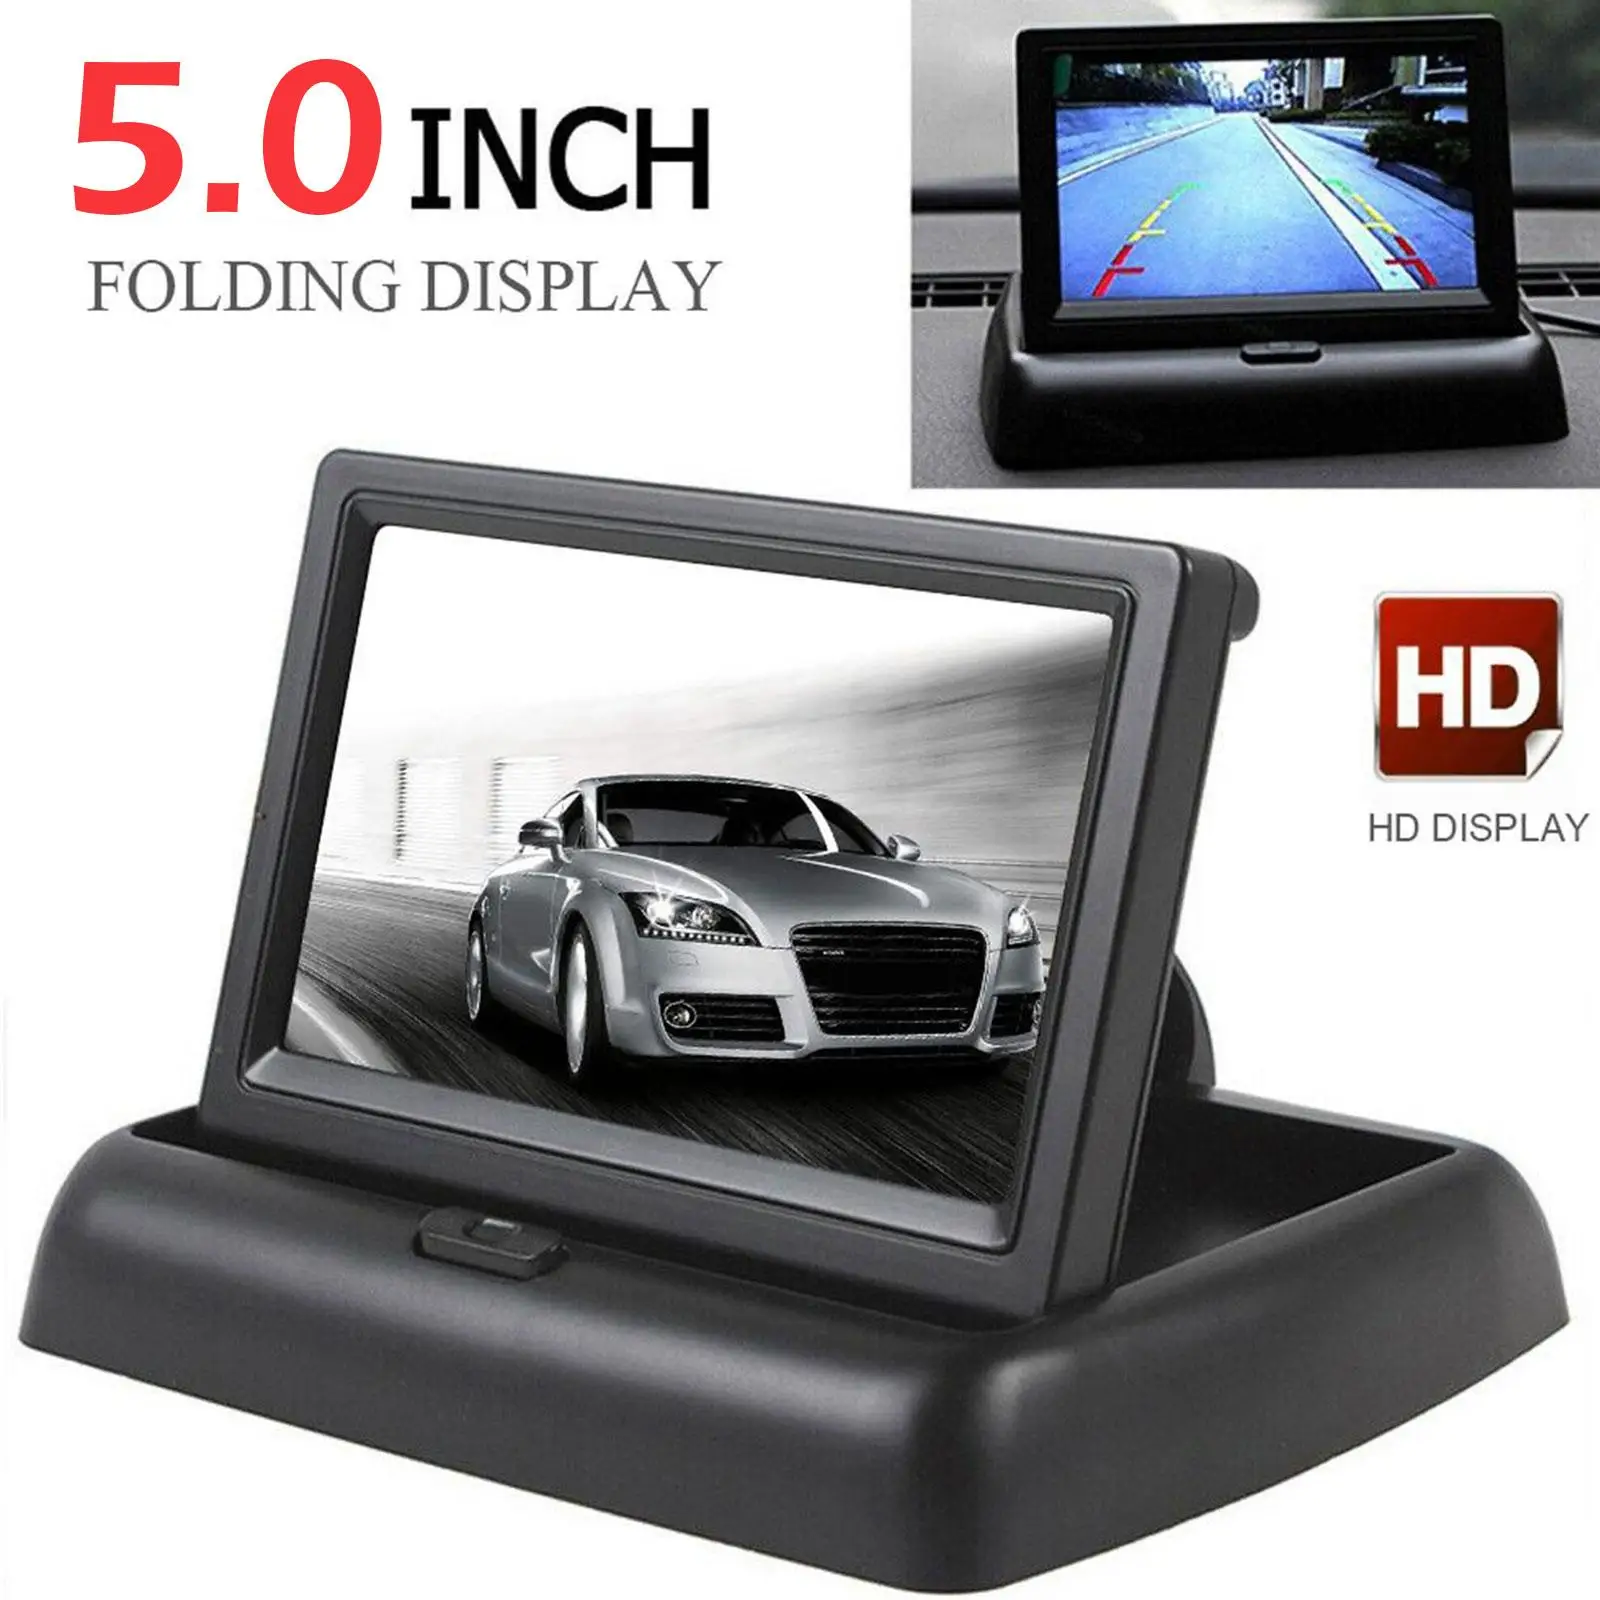 

Car Monitor Screen For Rear View Reverse Camera 5.0" TFT LCD Display HD Digital Color 5.0 Inch HD Screen Parking Assistance Q2F0